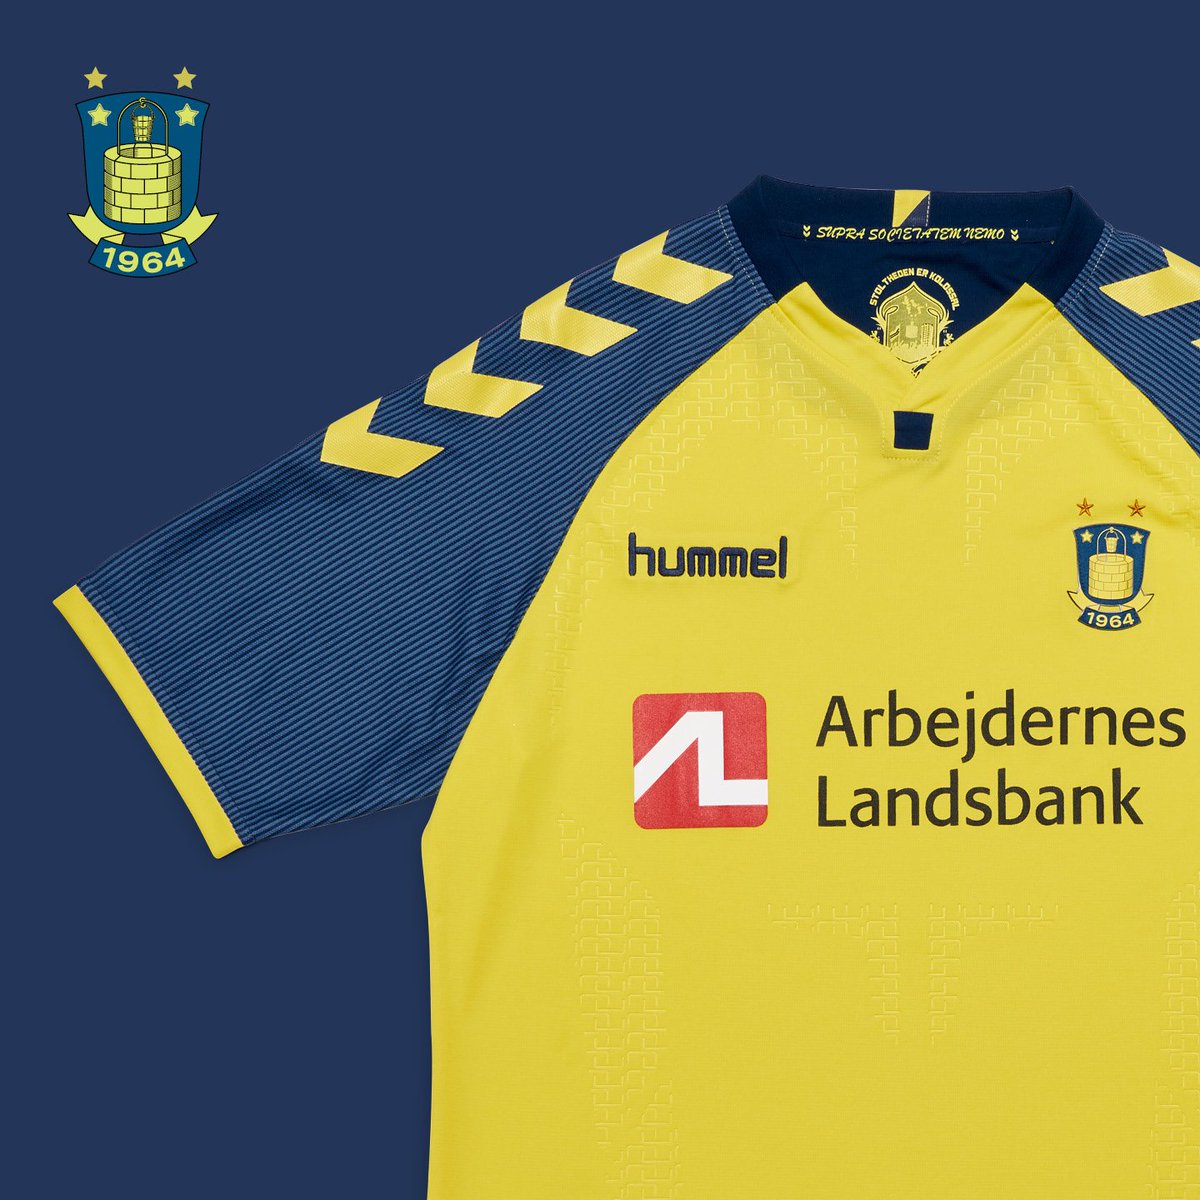 hummel on Twitter: "@BrondbyIF Their motto 'Supra Societatem Nemo' roughly to 'No One Above The Community' – this club has strong fan base!" / Twitter